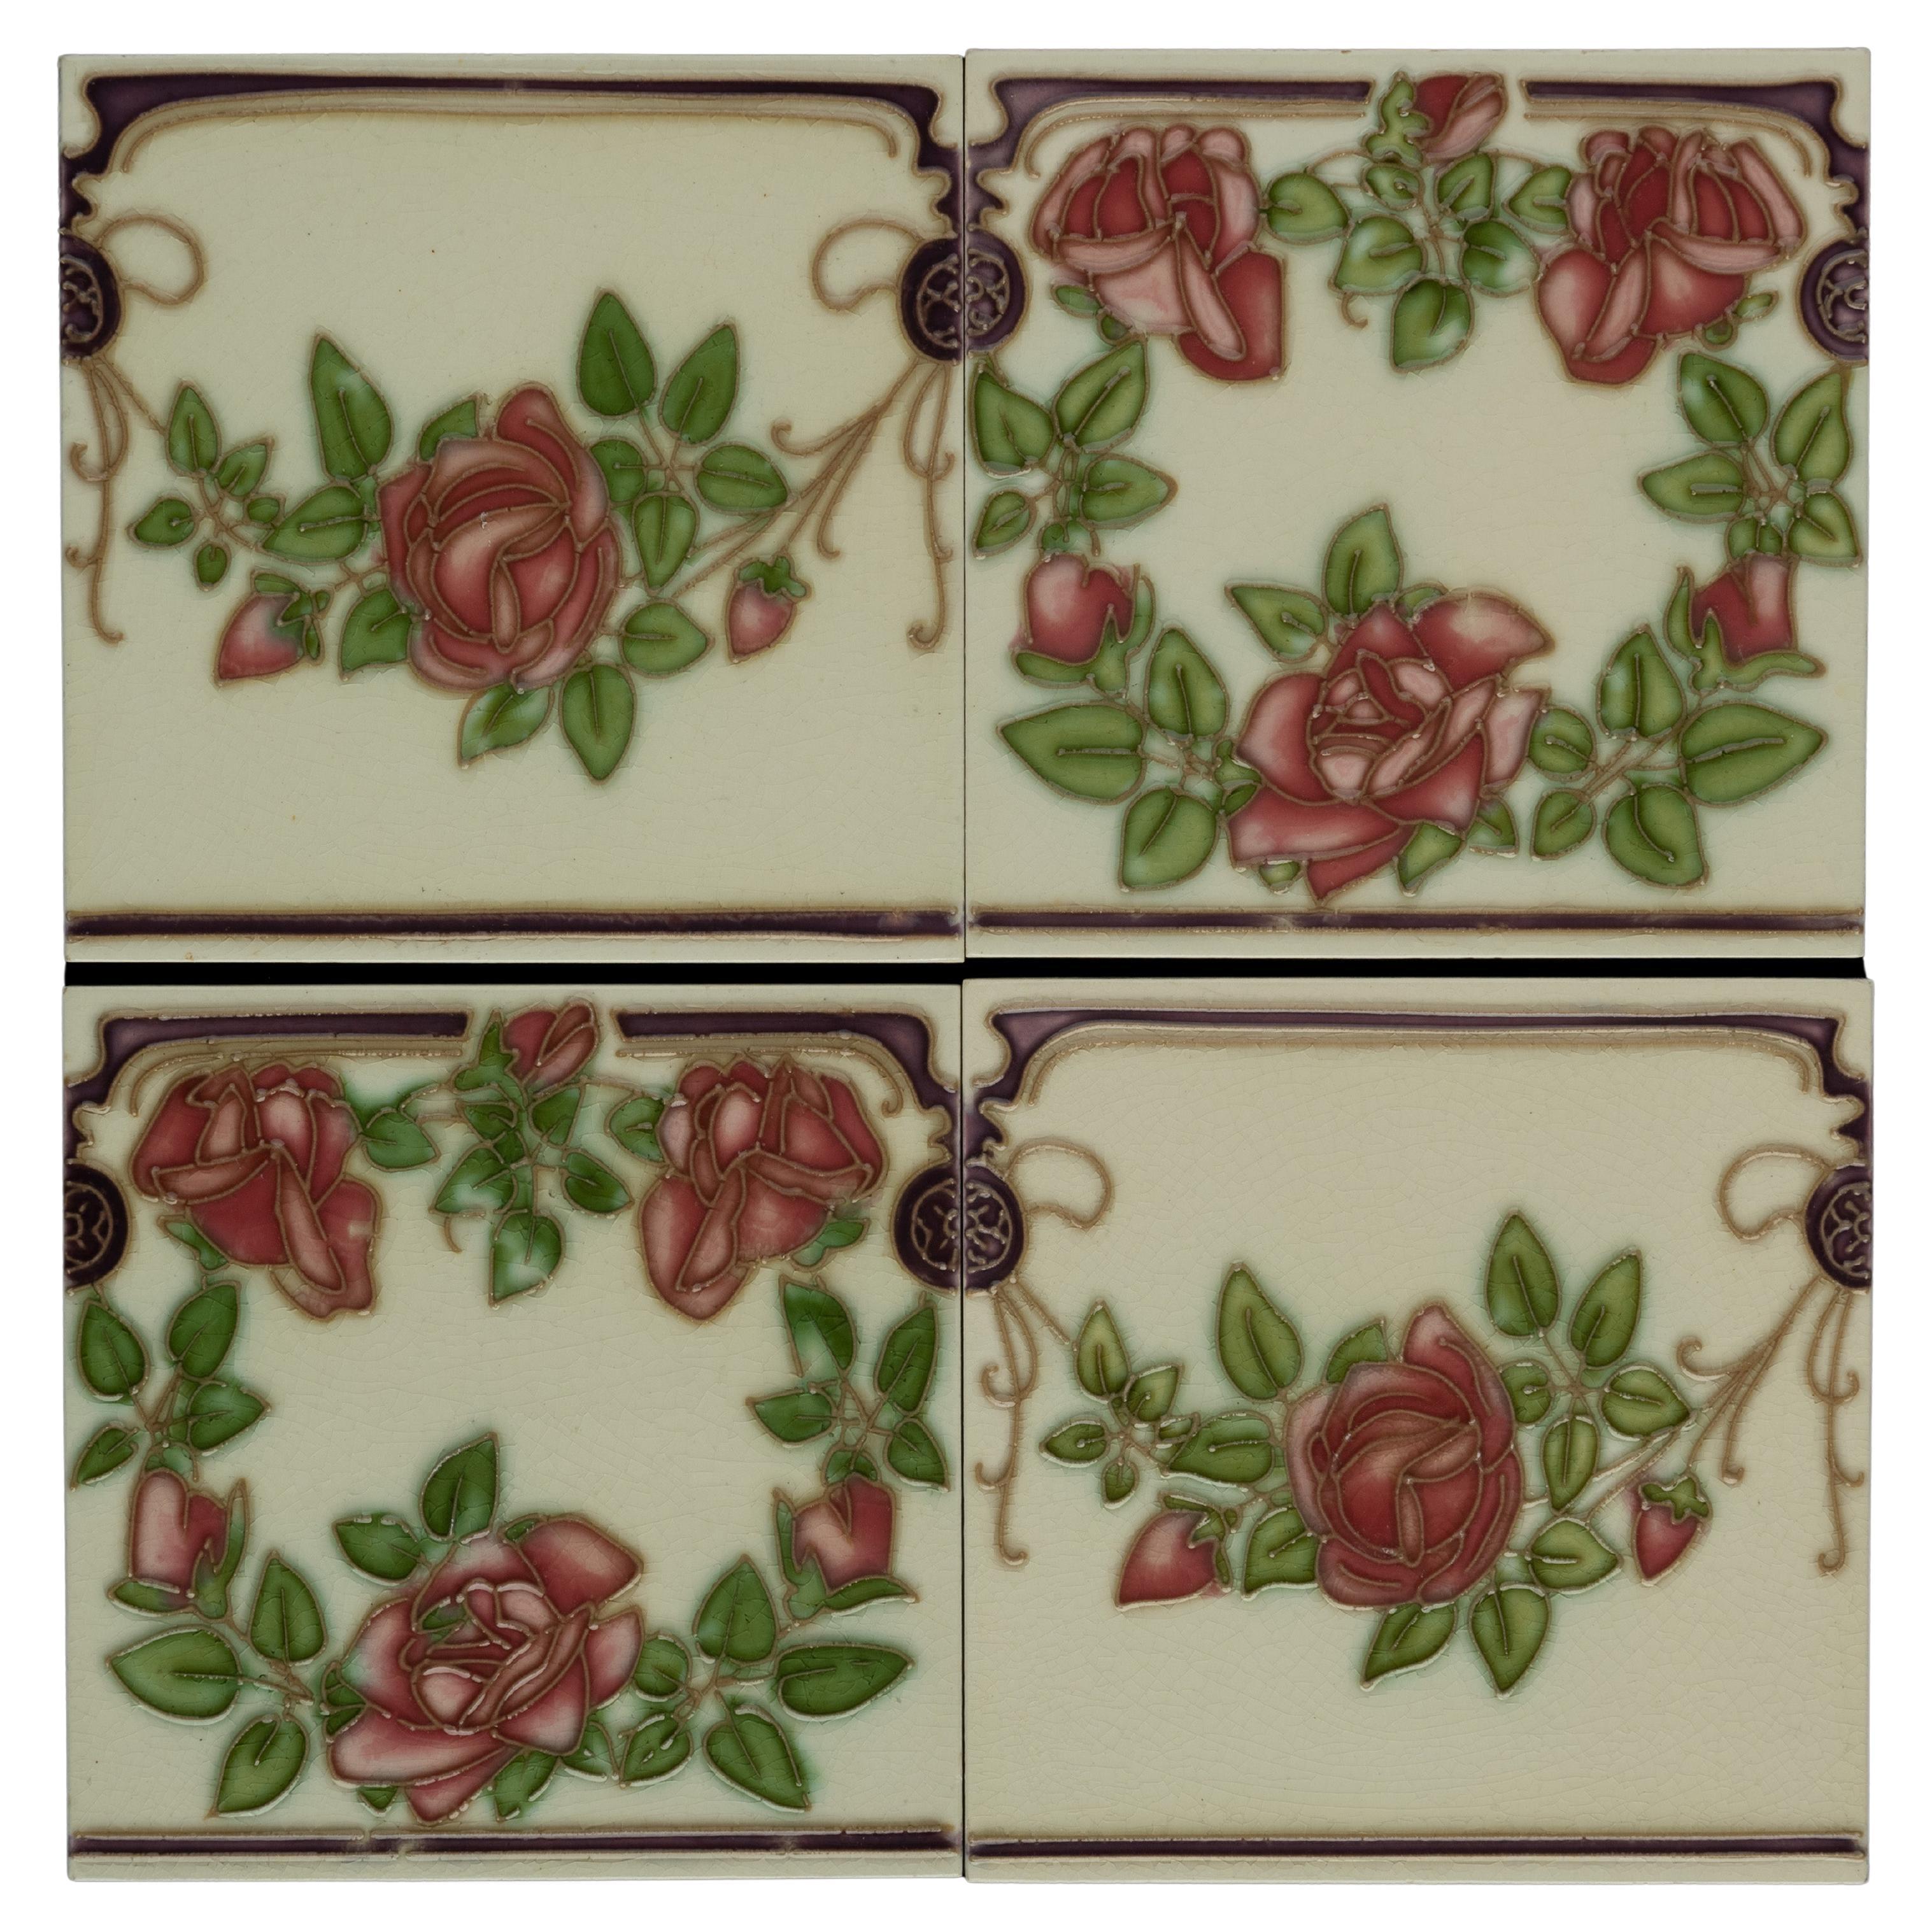 This is a special lot of 45 Art Nouveau tiles depicting a continuous decor with roses. The decor is applied in tube-lining technique. 

Slip clay is  placed in a sqeeze bulb fitted with a fine nozzle. As the bulb is squeezed, a thin line of clay is